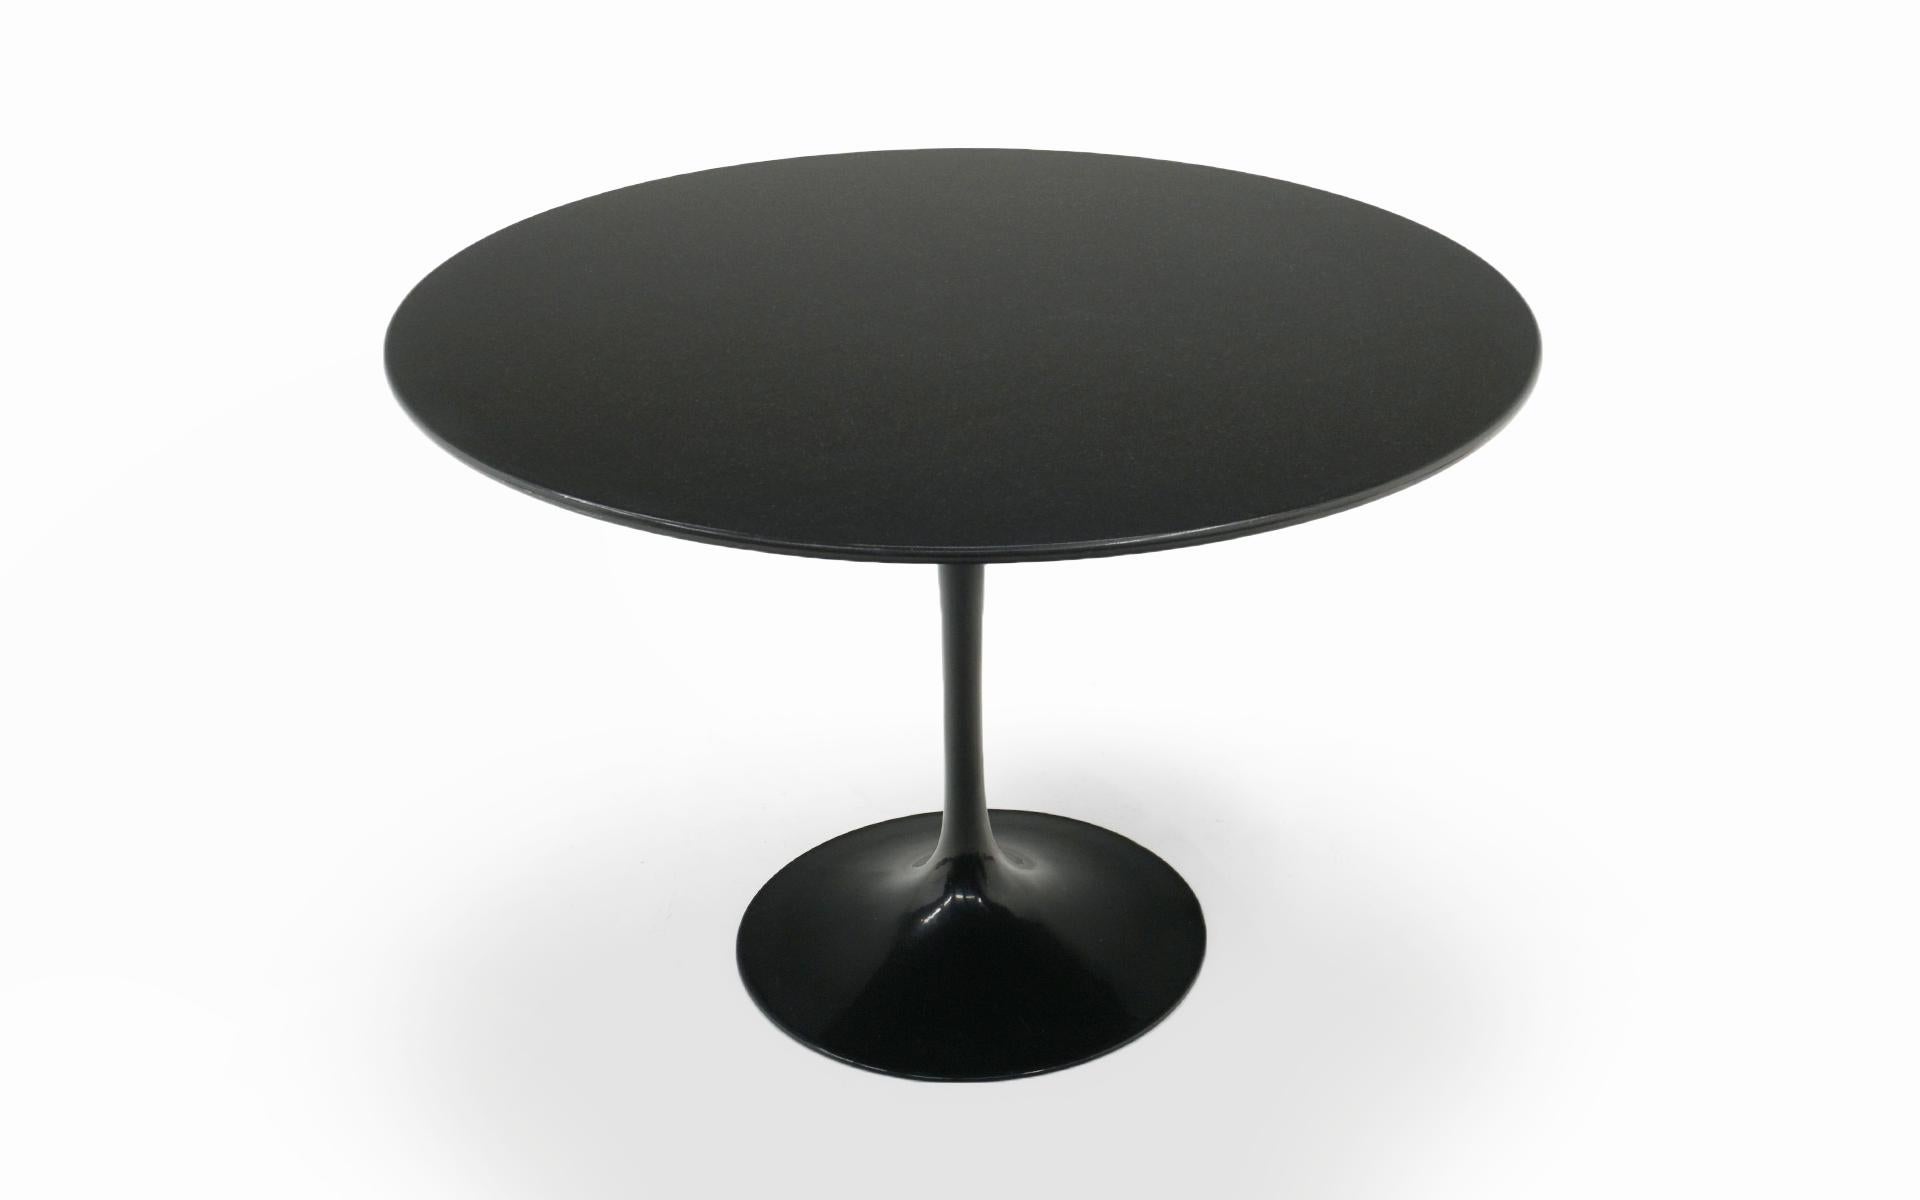 Early production 42 inch round pedestal dining table designed by Eero Saarinen and manufactured by Knoll International. Heavy, thick black granite top and lacquered cast iron base. This is not cast aluminum as used in later production. Retains early